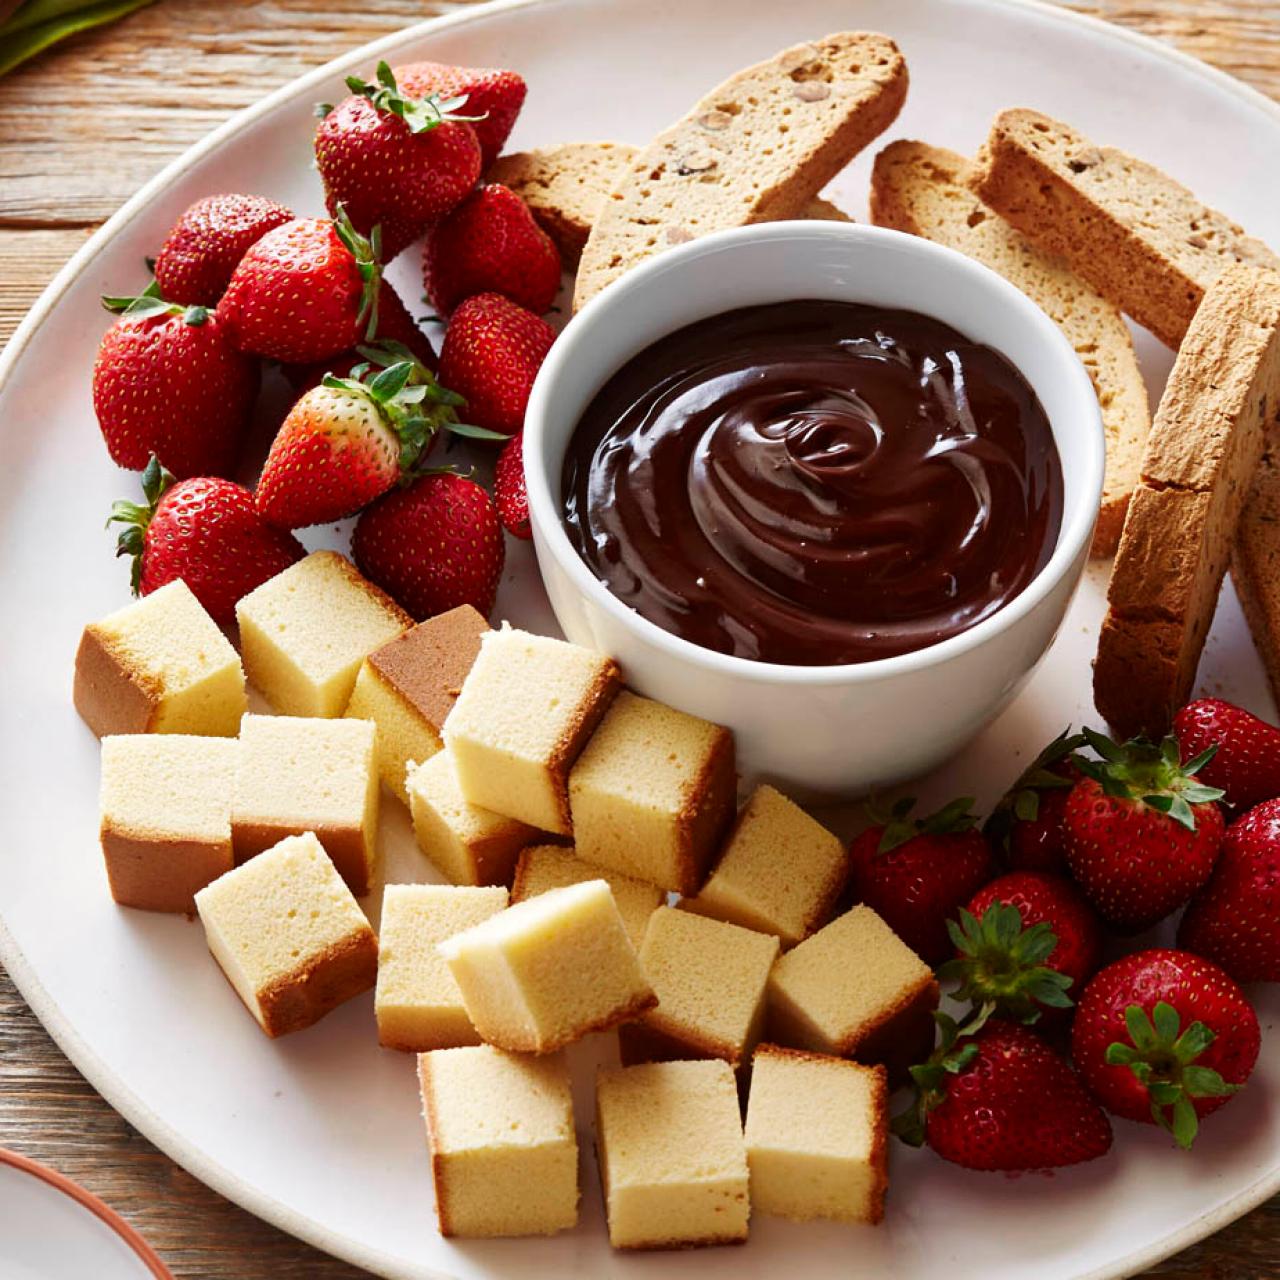 How to Make Chocolate Fondue Just Like Melting Pot - Oh So Delicioso